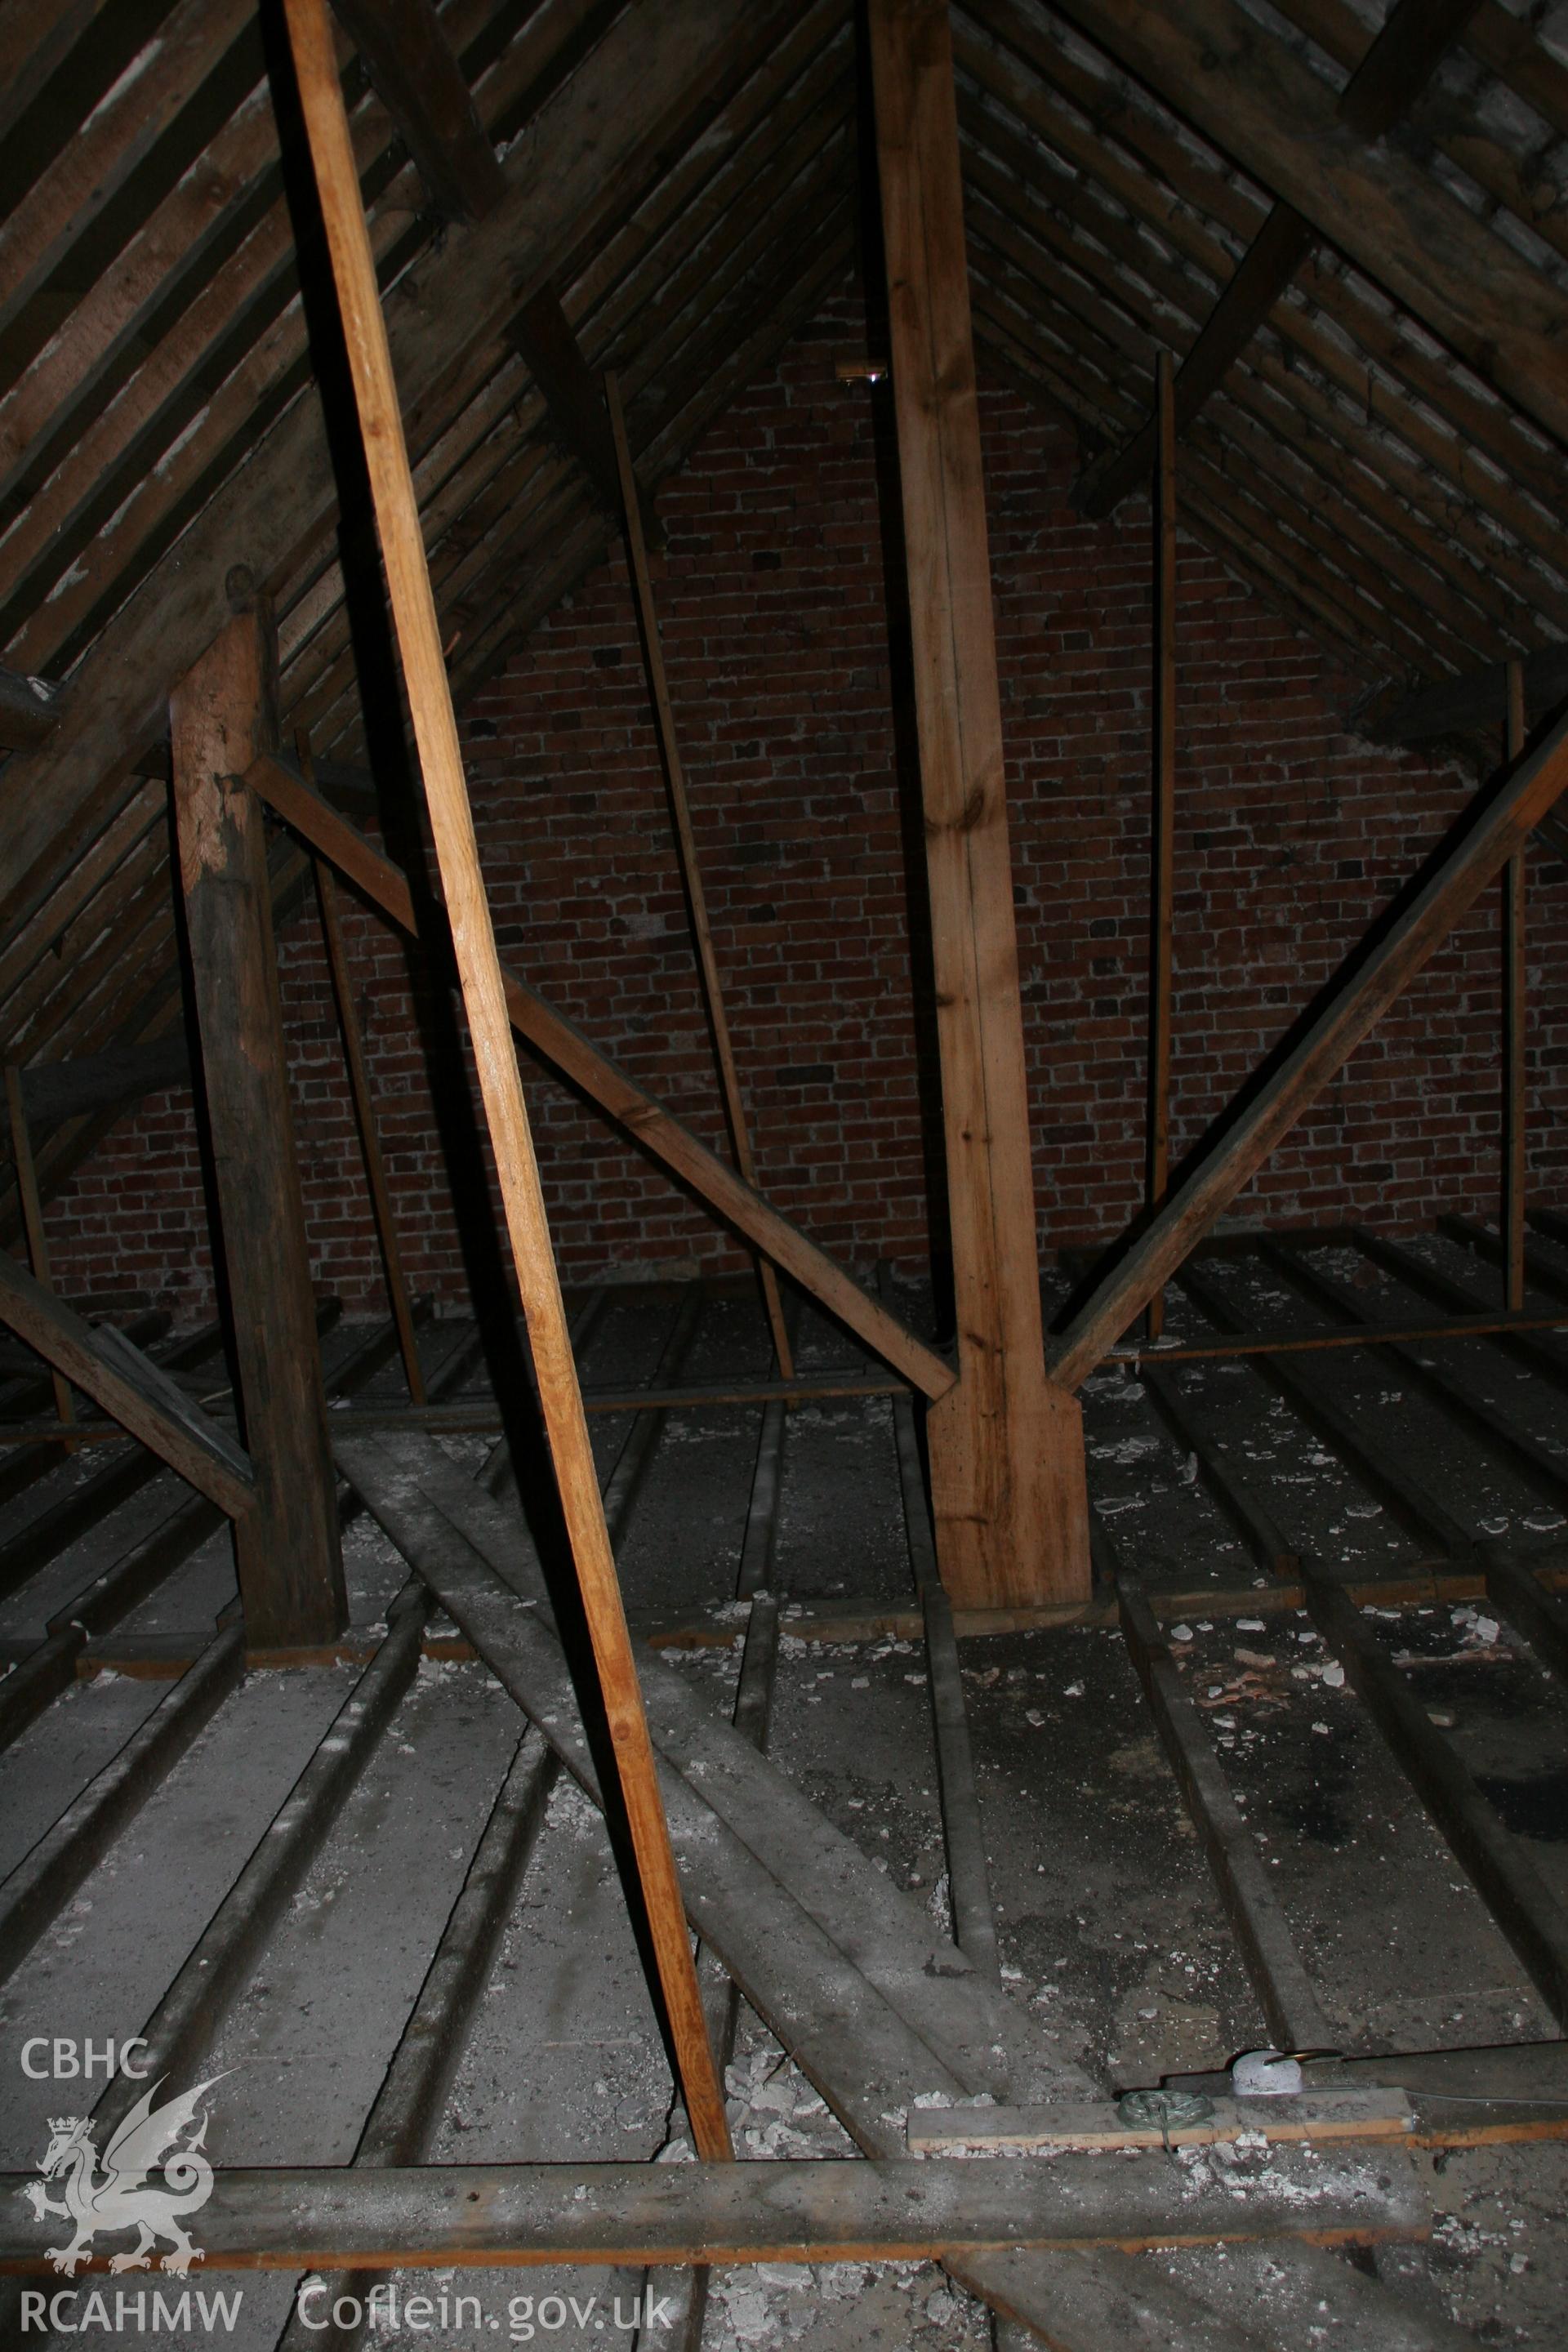 Photograph showing interior view of wooden beams, floor boards & brick wall in loft of former Llawrybettws Welsh Calvinistic Methodist chapel, Glanyrafon, Corwen. Taken by Tim Allen on 27/02/2019 to meet a condition attached to planning application.